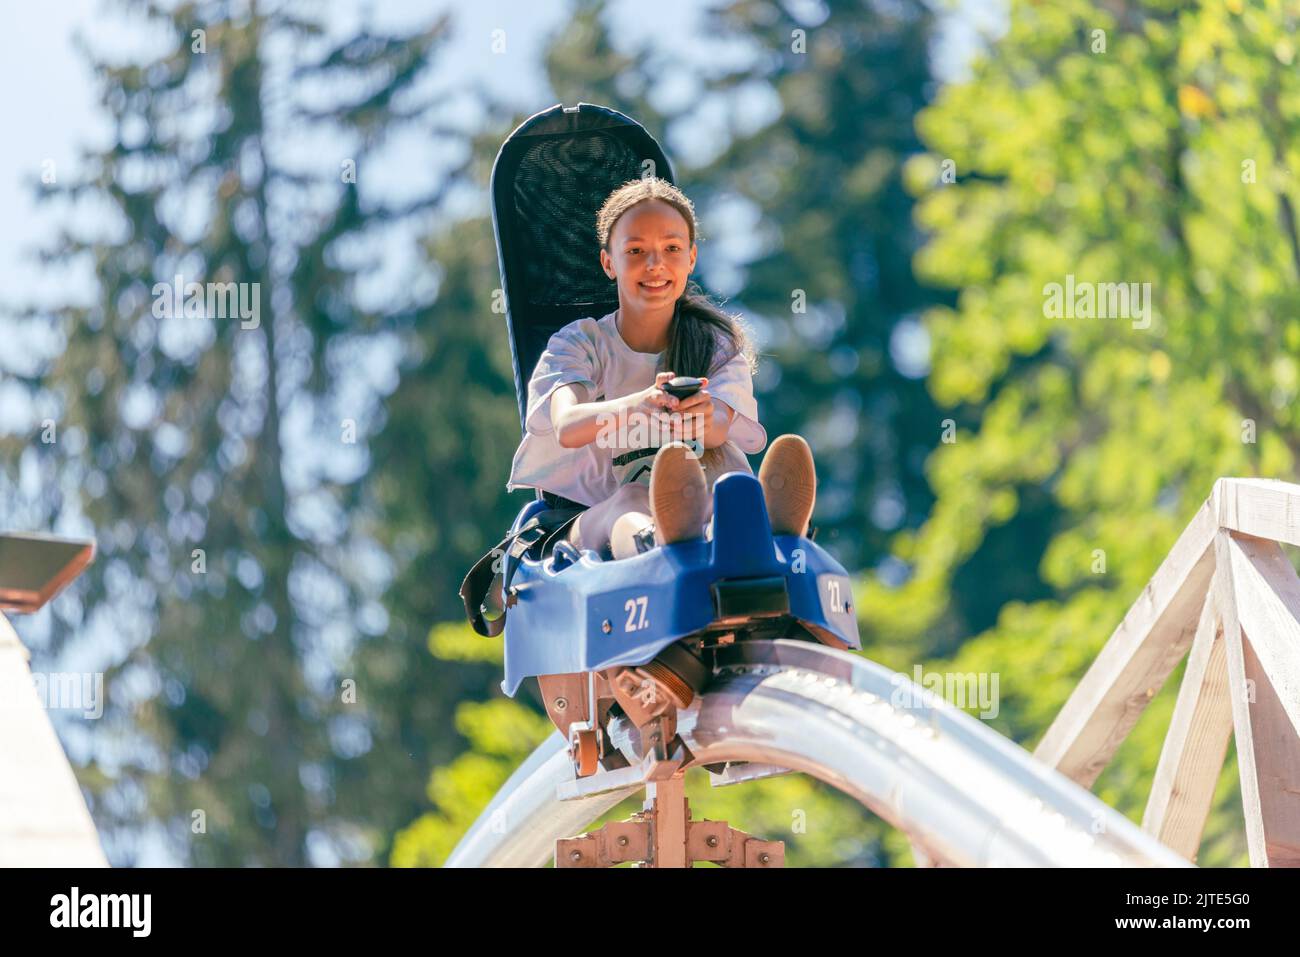 Dirl is going down a mountain with a roller coaster over a wooden bridge. Forest in background Stock Photo